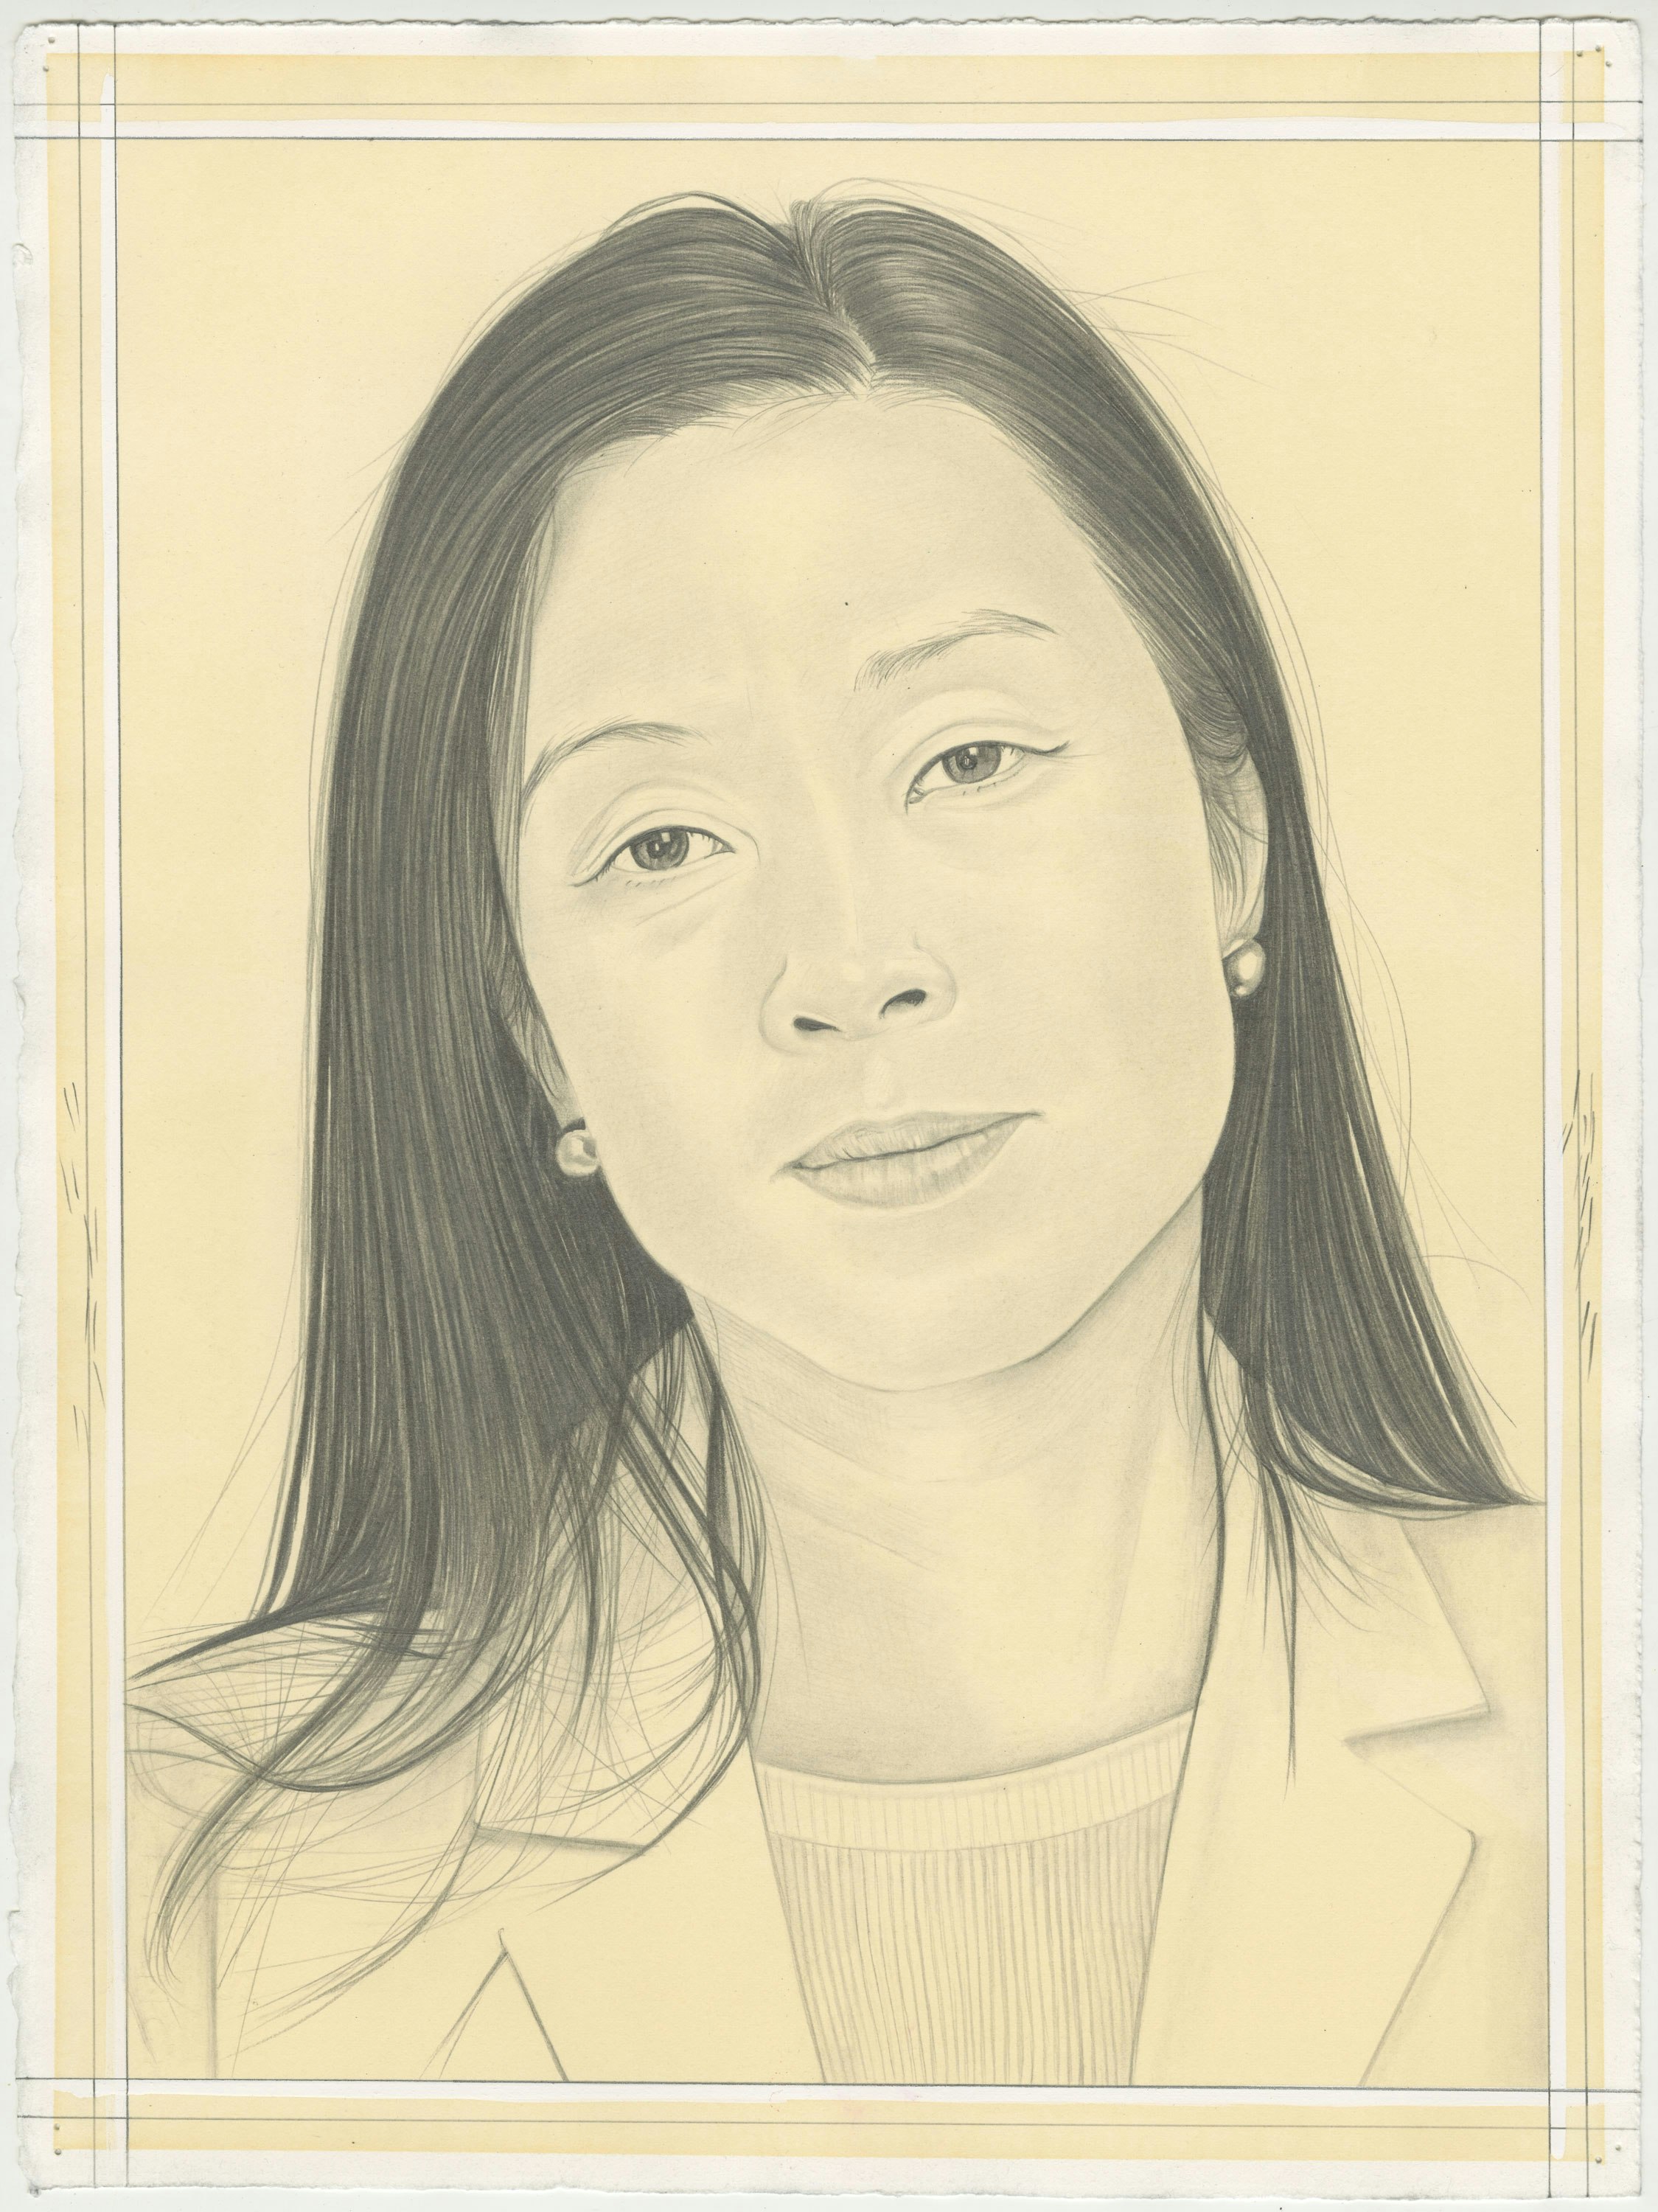 Portrait of Minjung Kim, pencil on paper by Phong H. Bui.